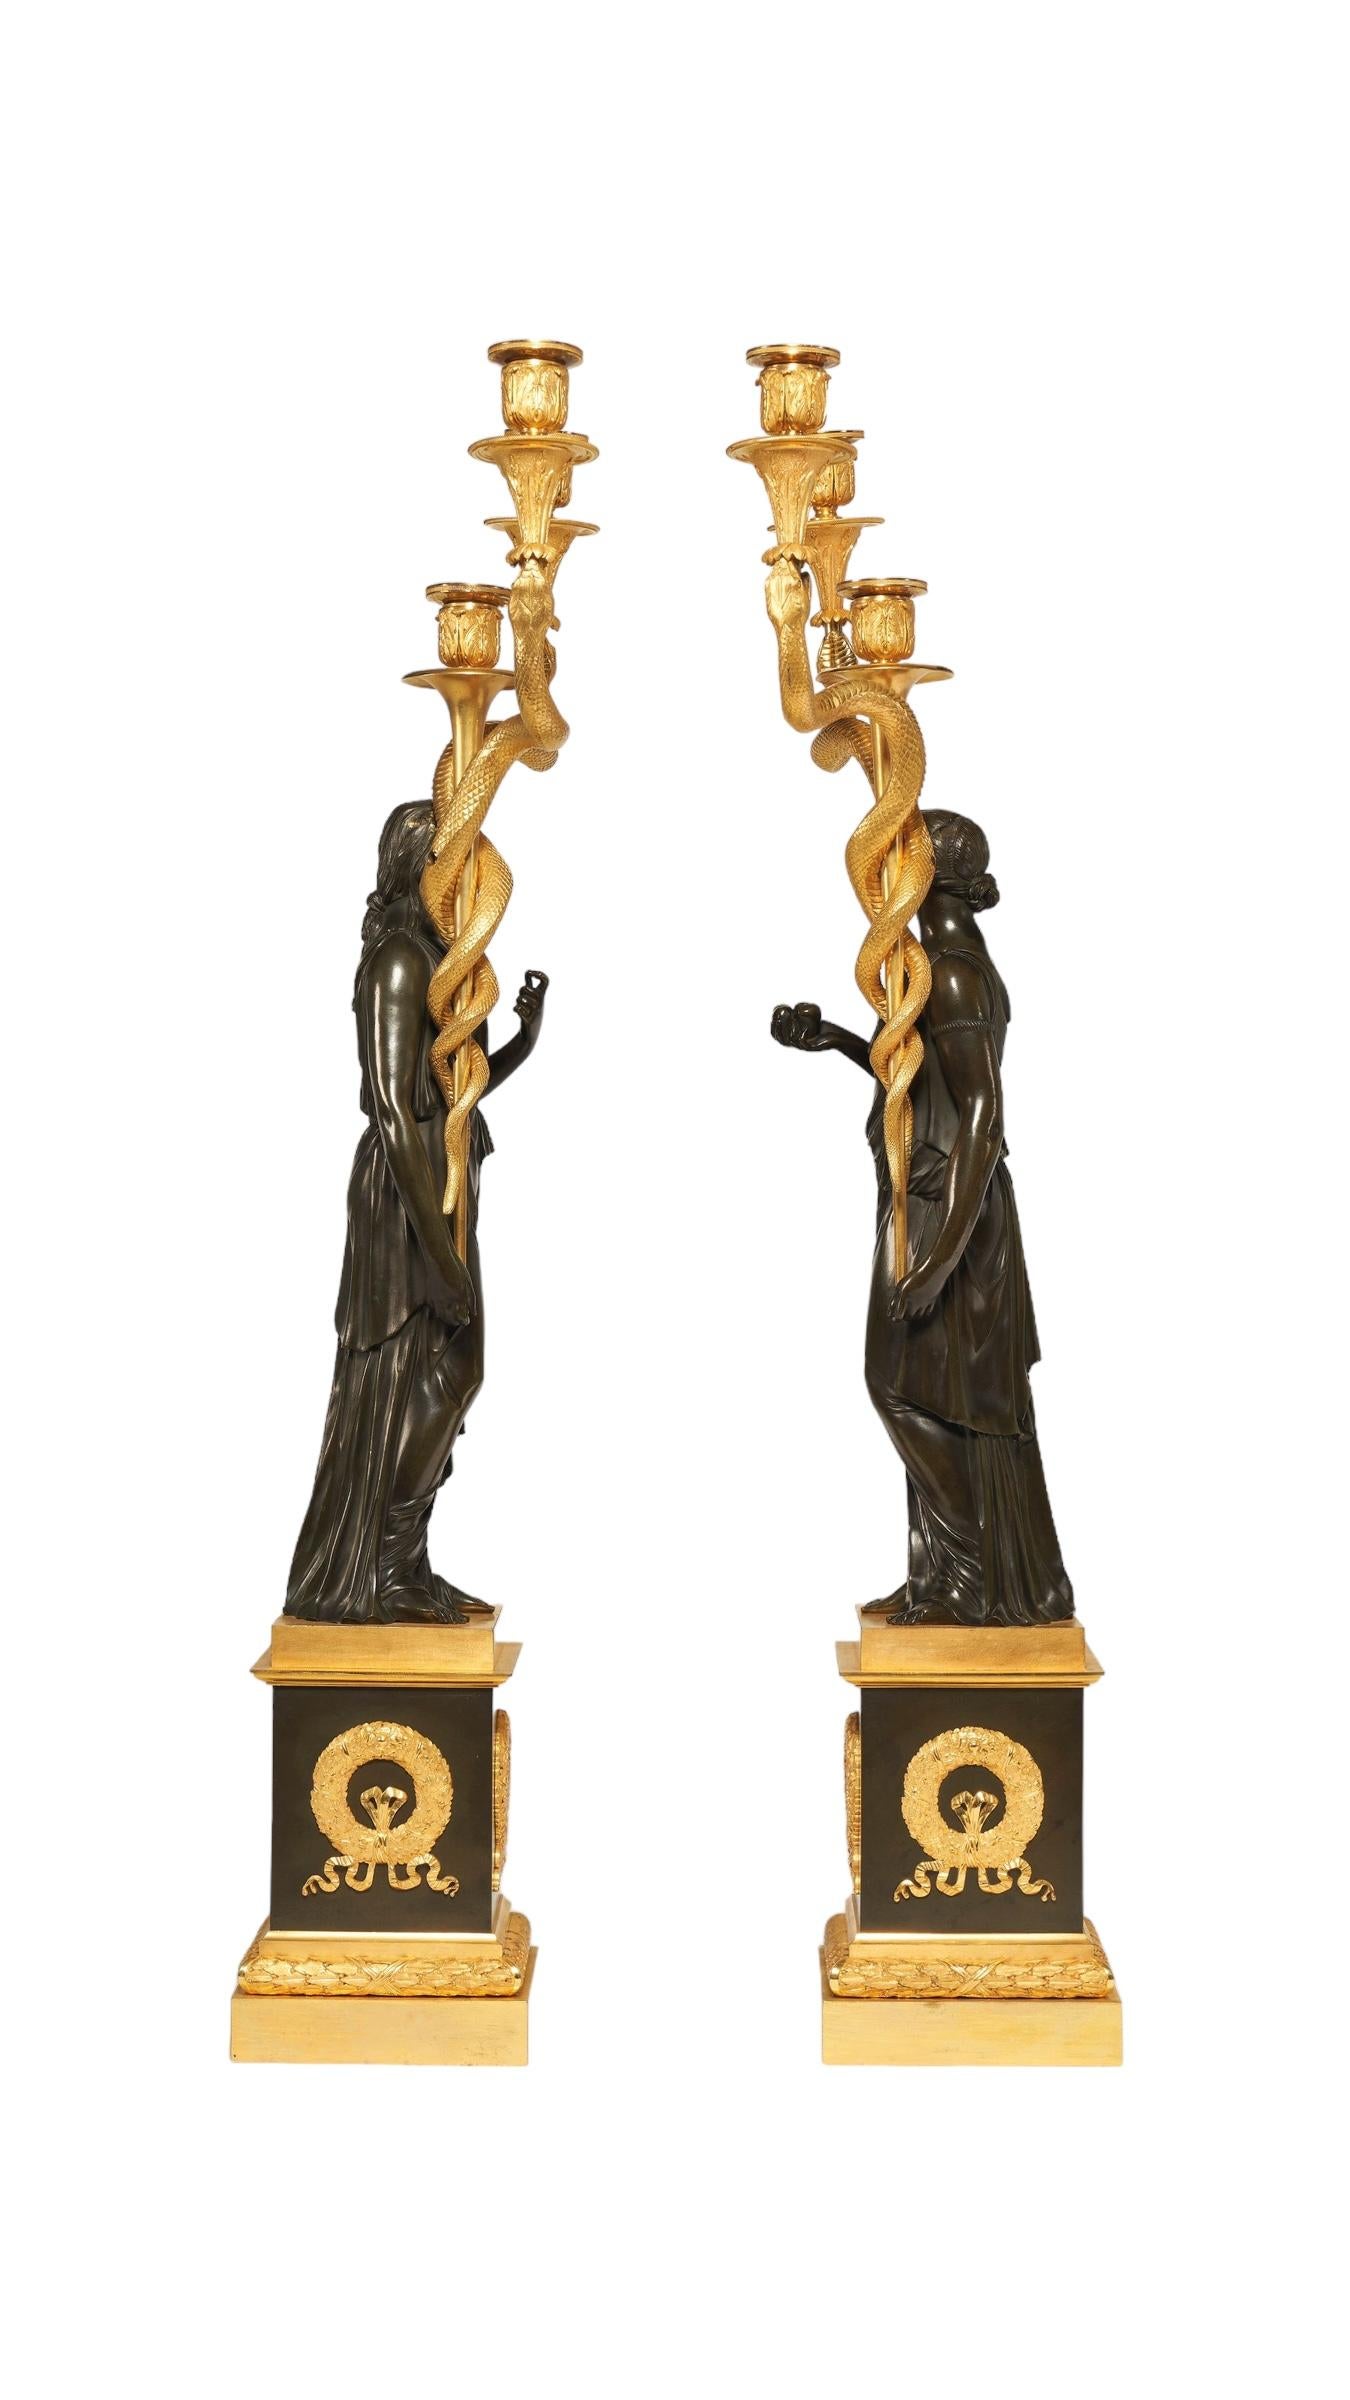 Gilt 19th Century French Empire Style Ormolu and Patinated Bronze Figural Candelabra For Sale